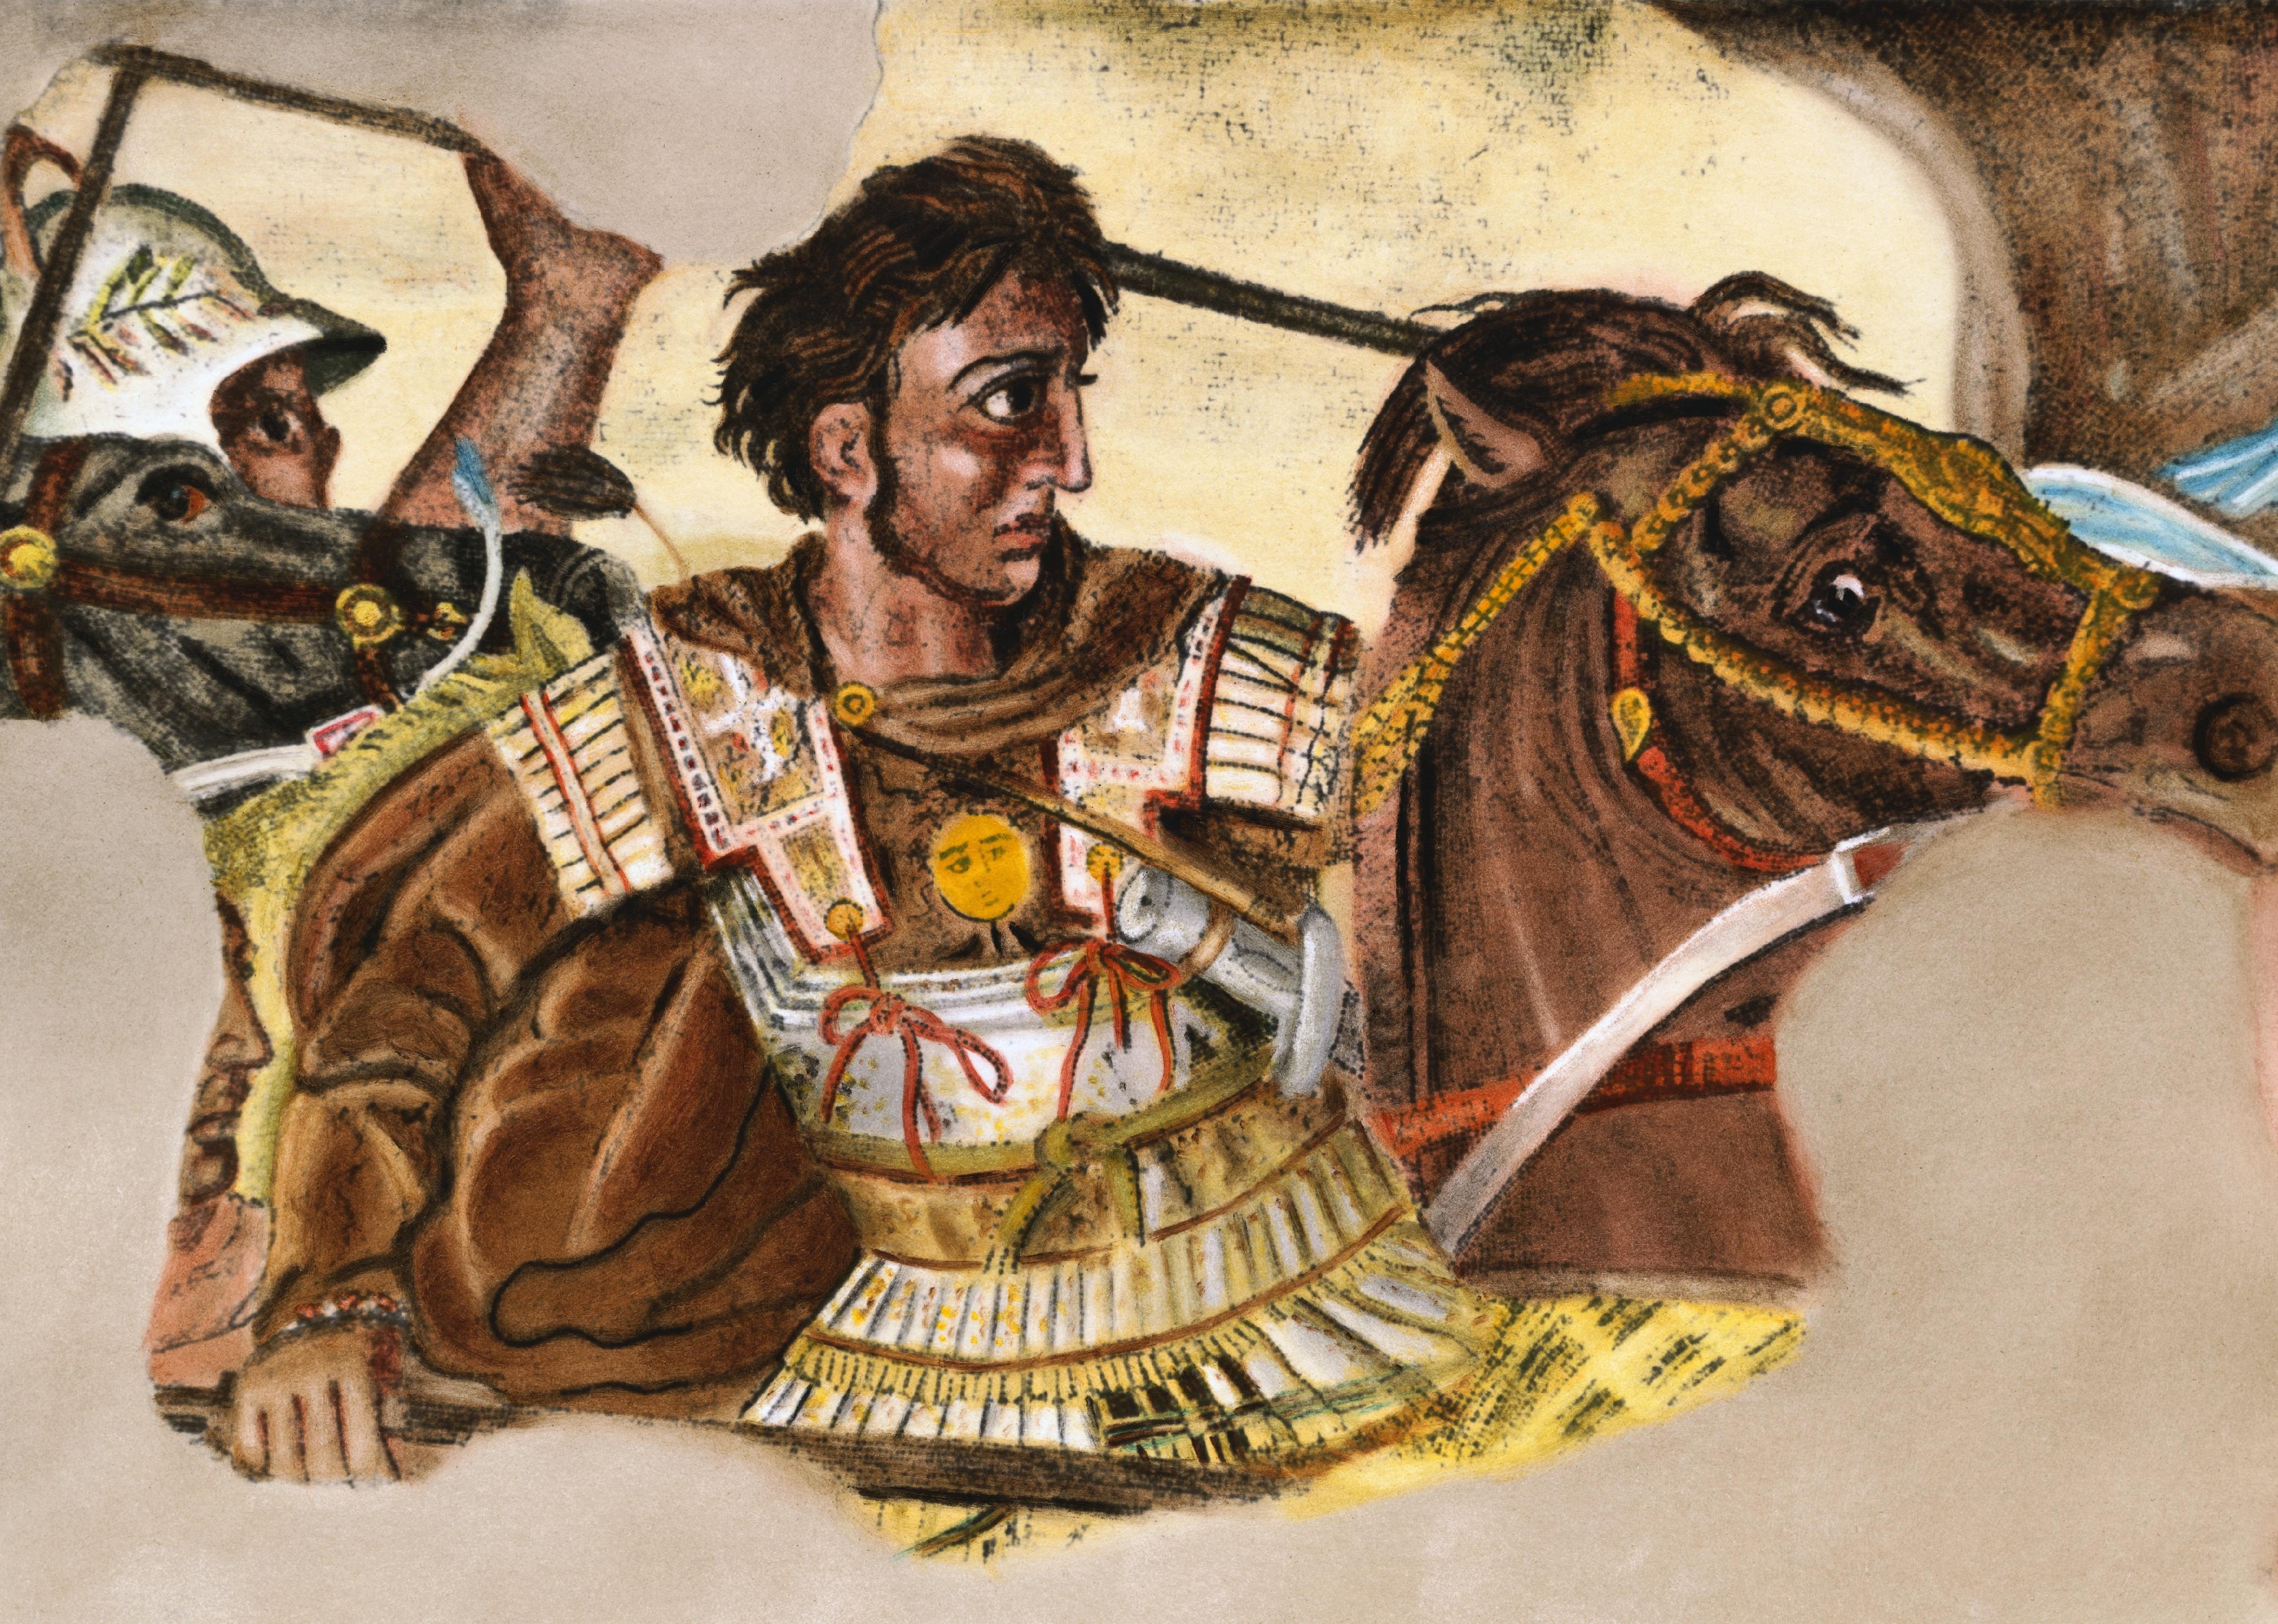 Alexander the Great fighting in the Battle of Issus.